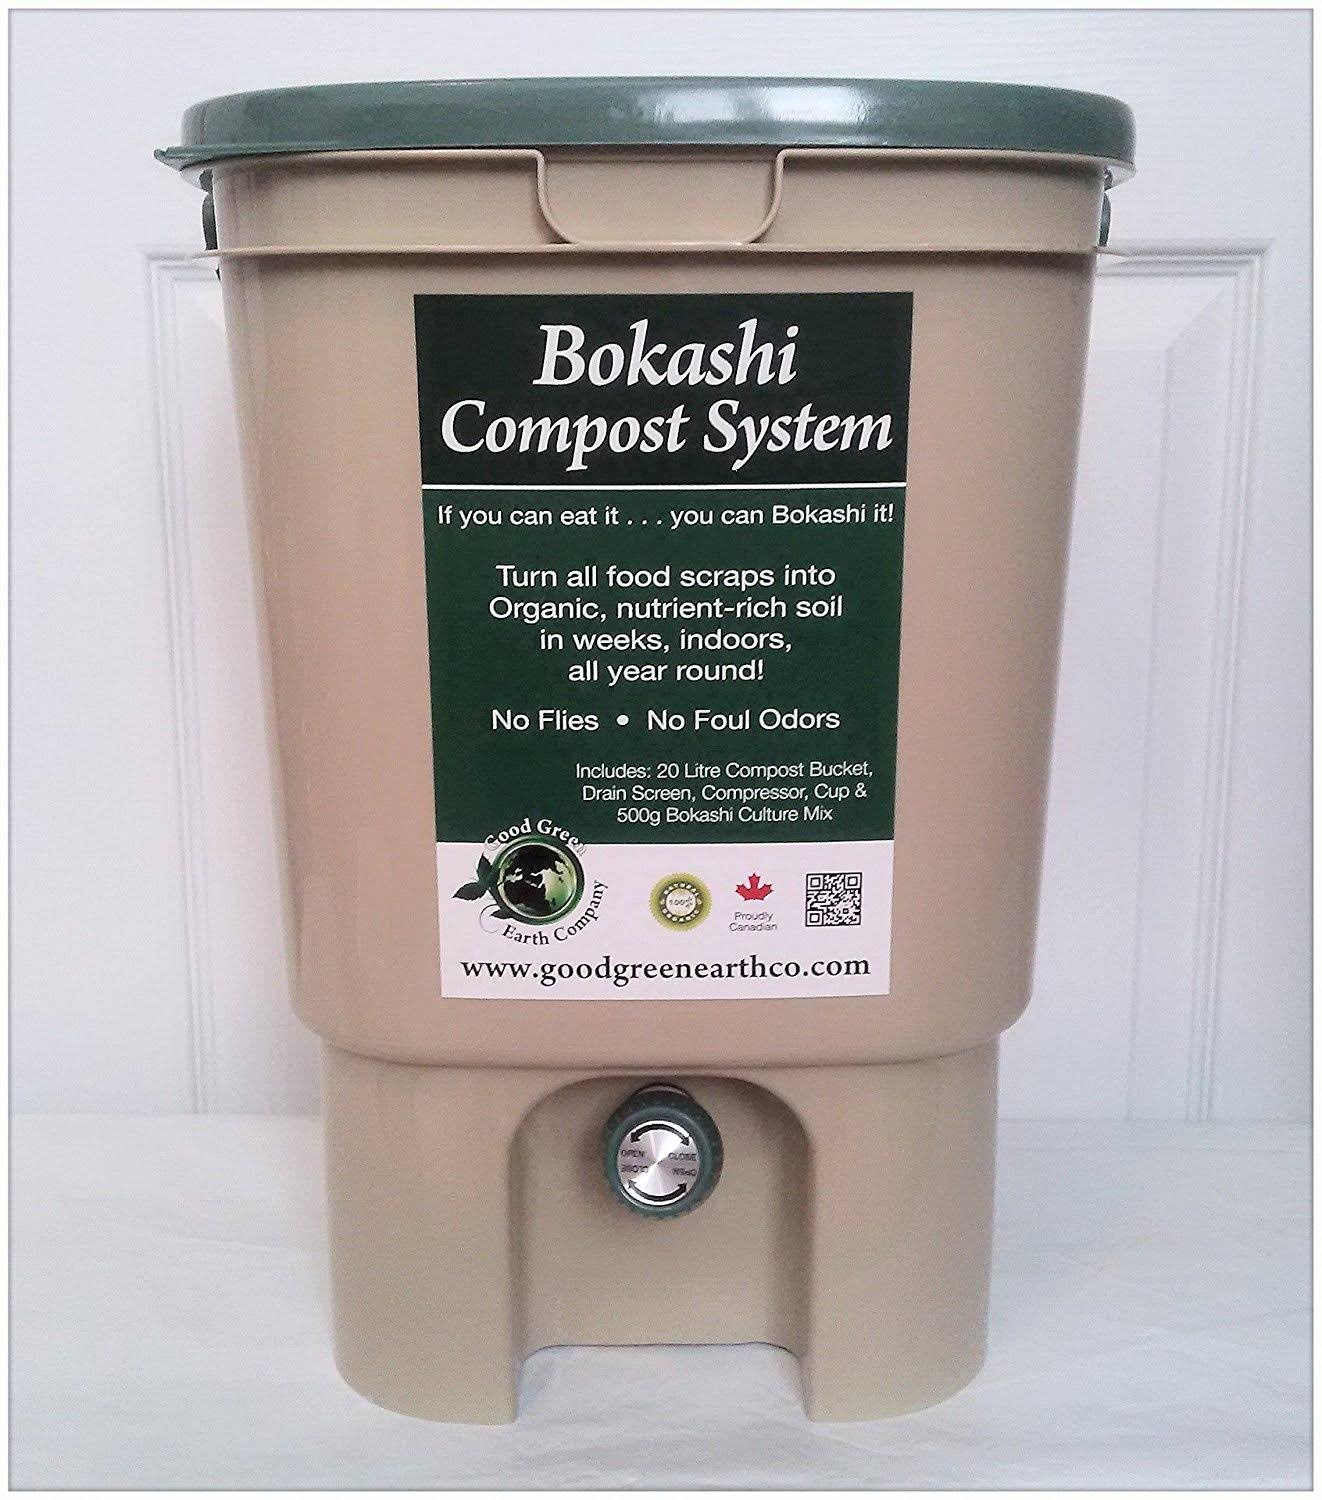 Good Green Earth Plastic Pet Waste Compost Kit - with Culture Mix, 12L